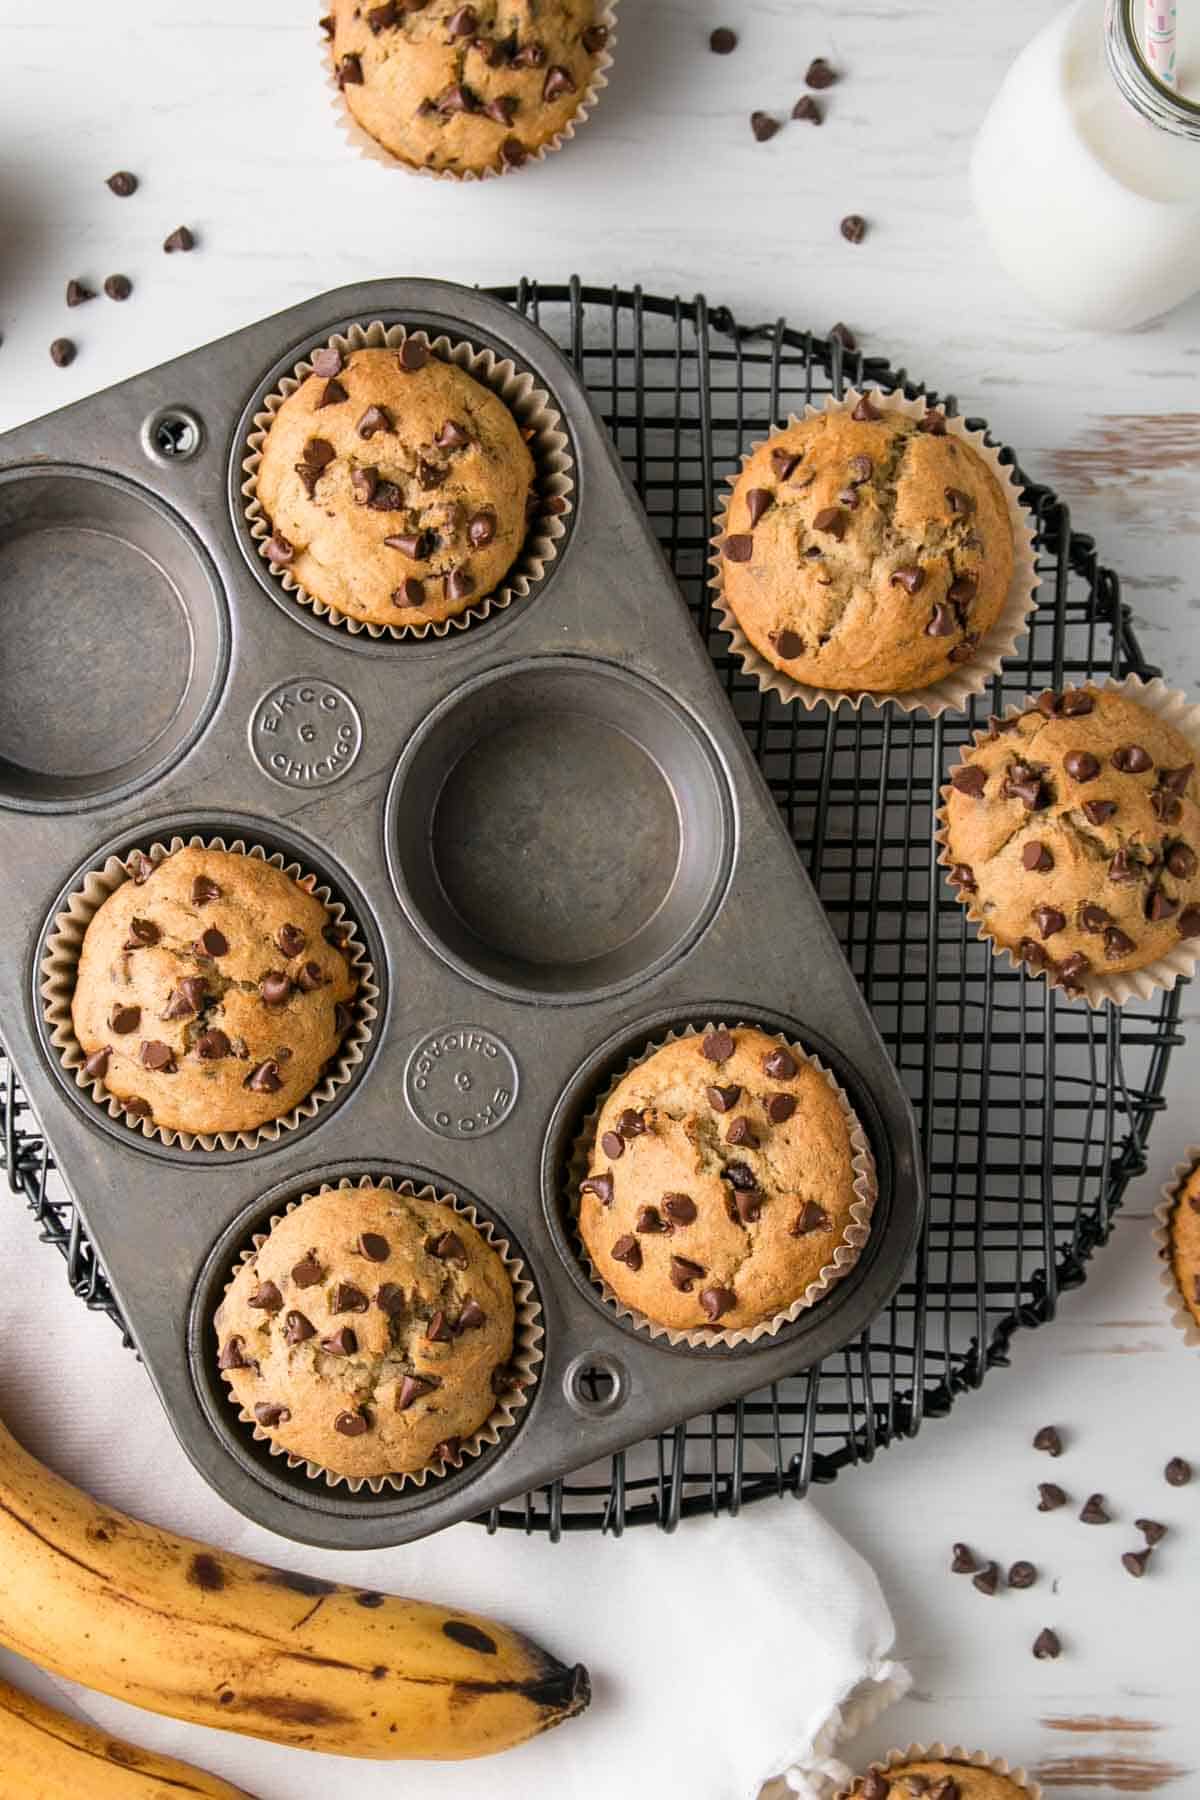 Muffins in an old muffin tin next to bananas and chocolate chips.